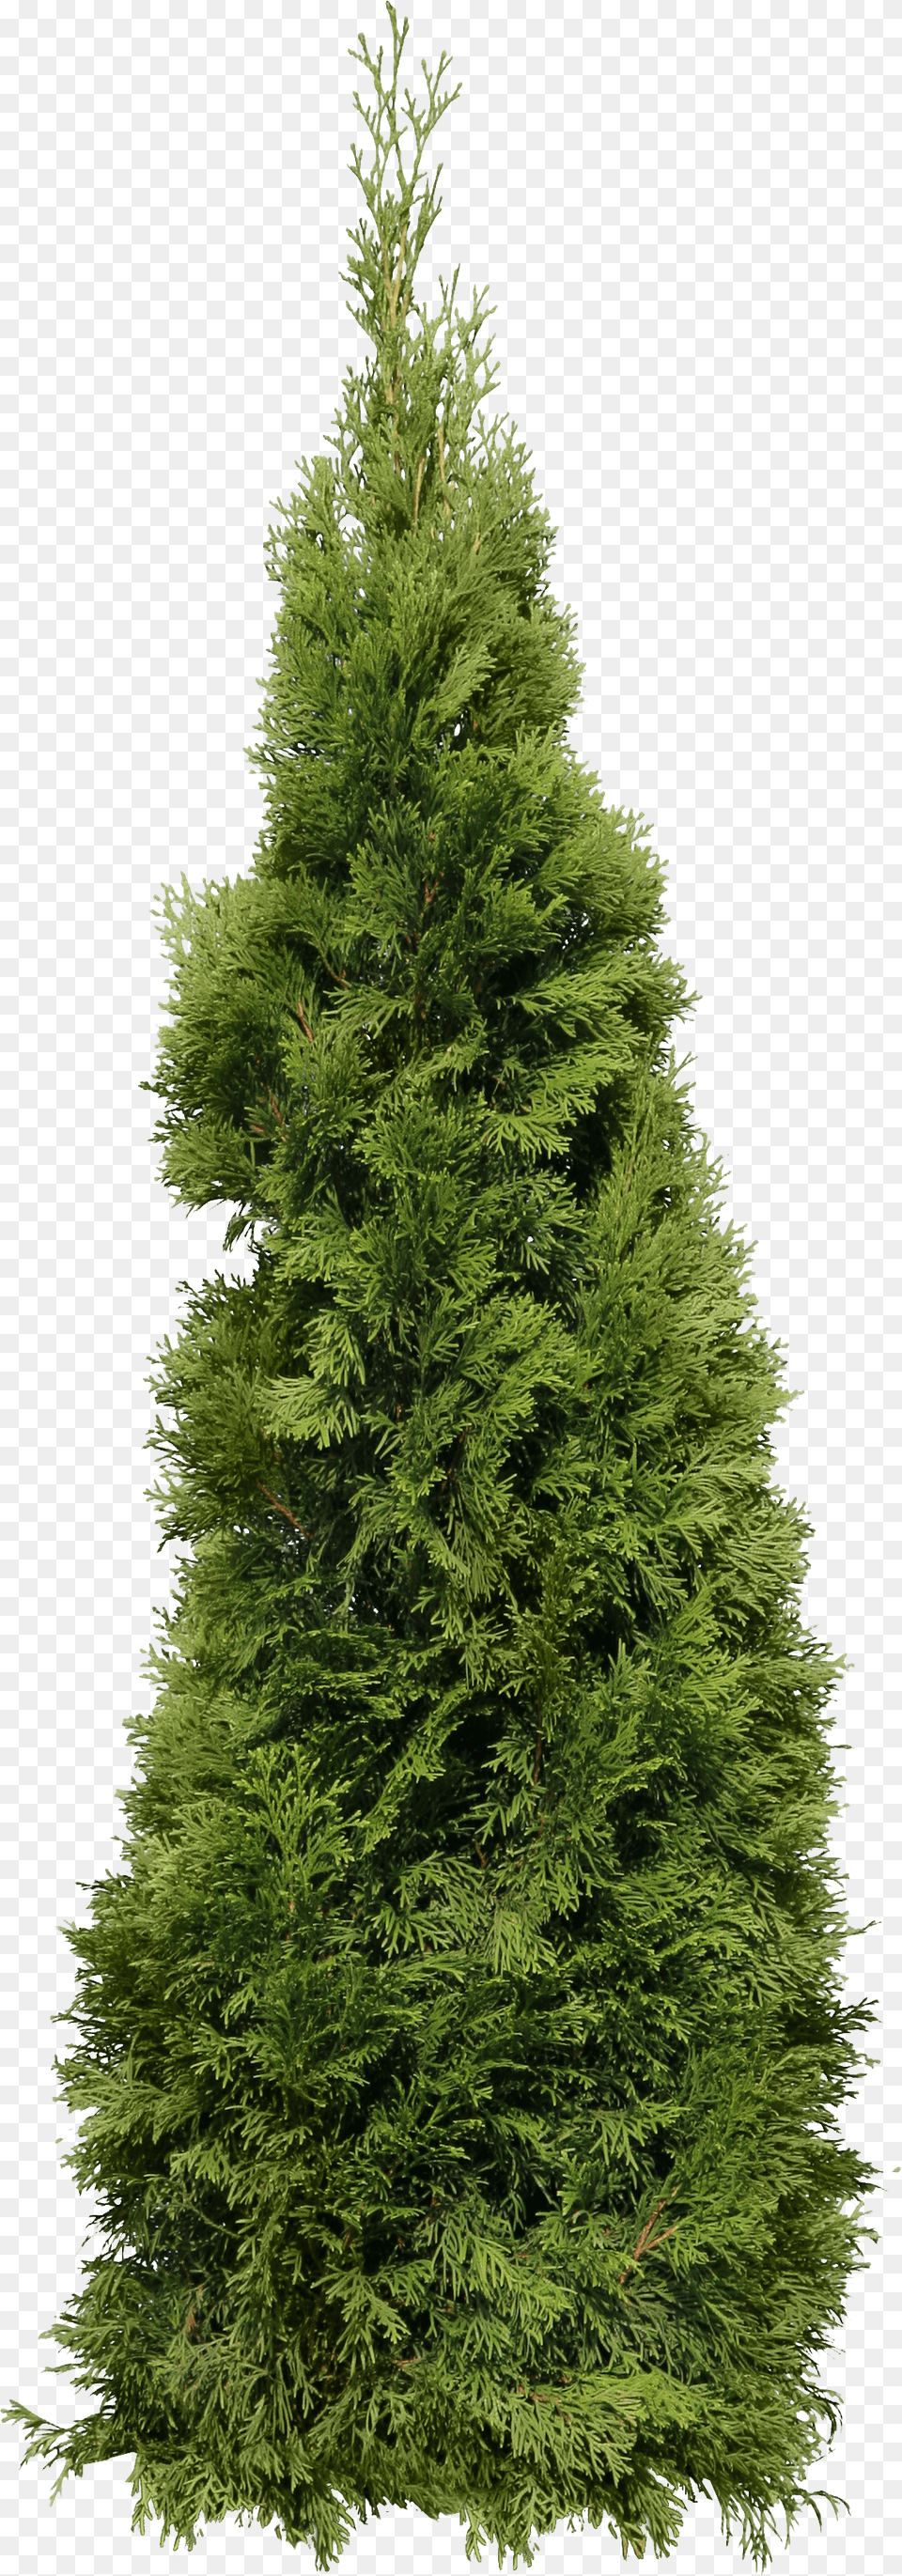 Green Big Fir Tree Image Fir Tree, Ct Scan, Baby, Person, Diagram Png